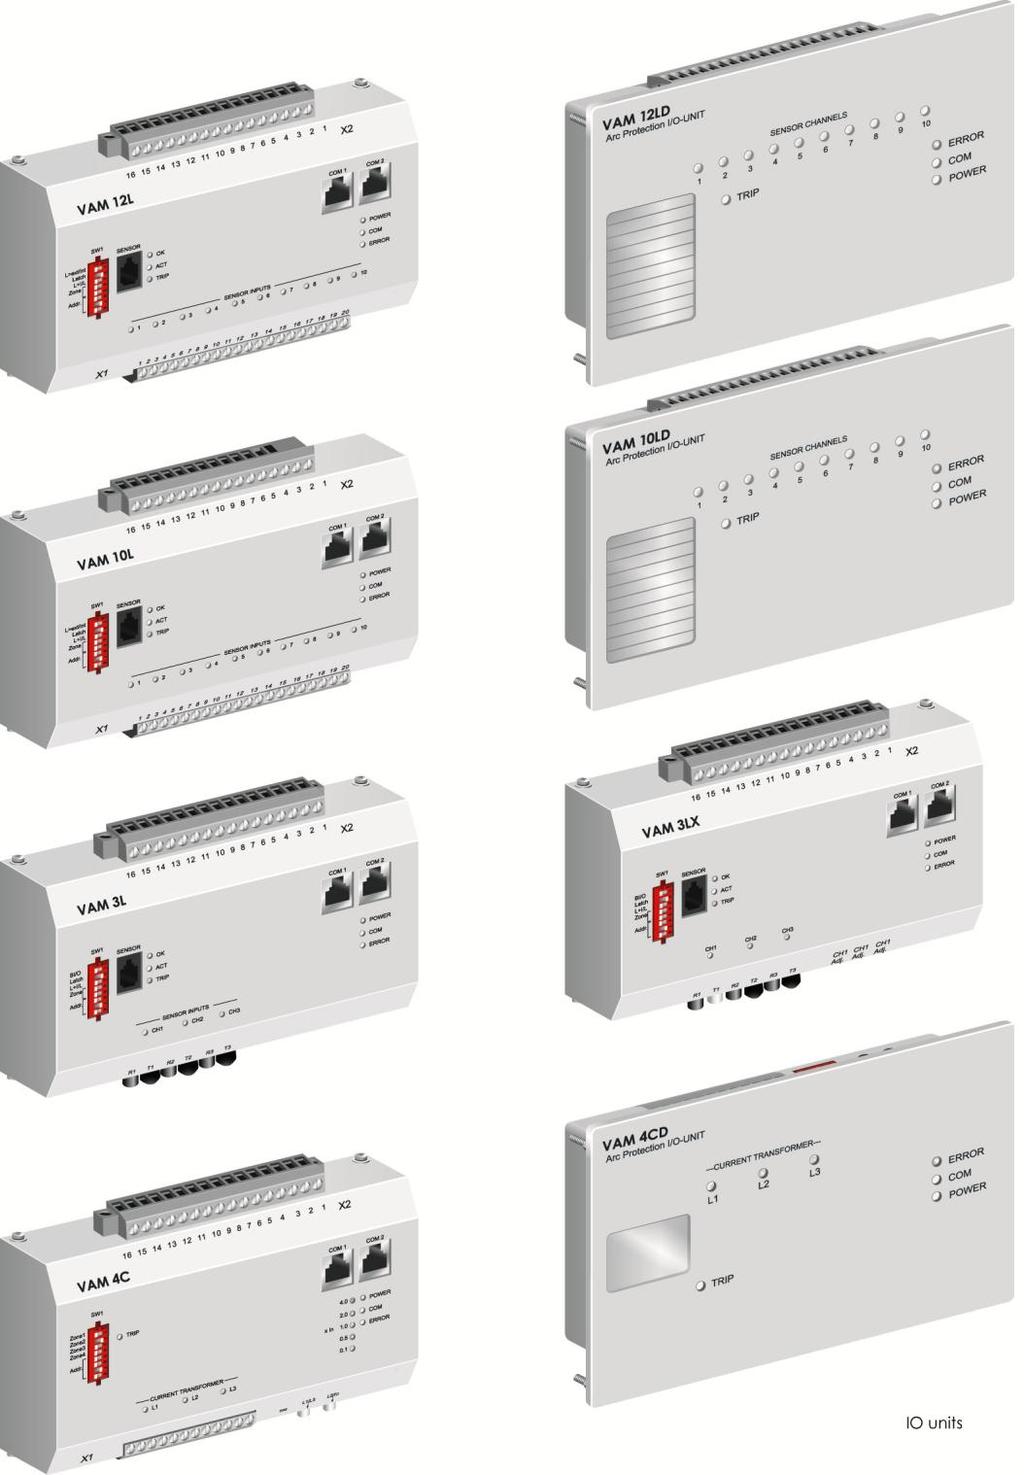 1.1 VAMP 221 arc protection system components 1 General VAMP 221 1.1.2. I/O units VAM 12L / VAM 12 LD, VAM 10L / VAM 10LD, VAM 3L / VAM 3LX and VAM 4C / VAM 4CD Figure 1.